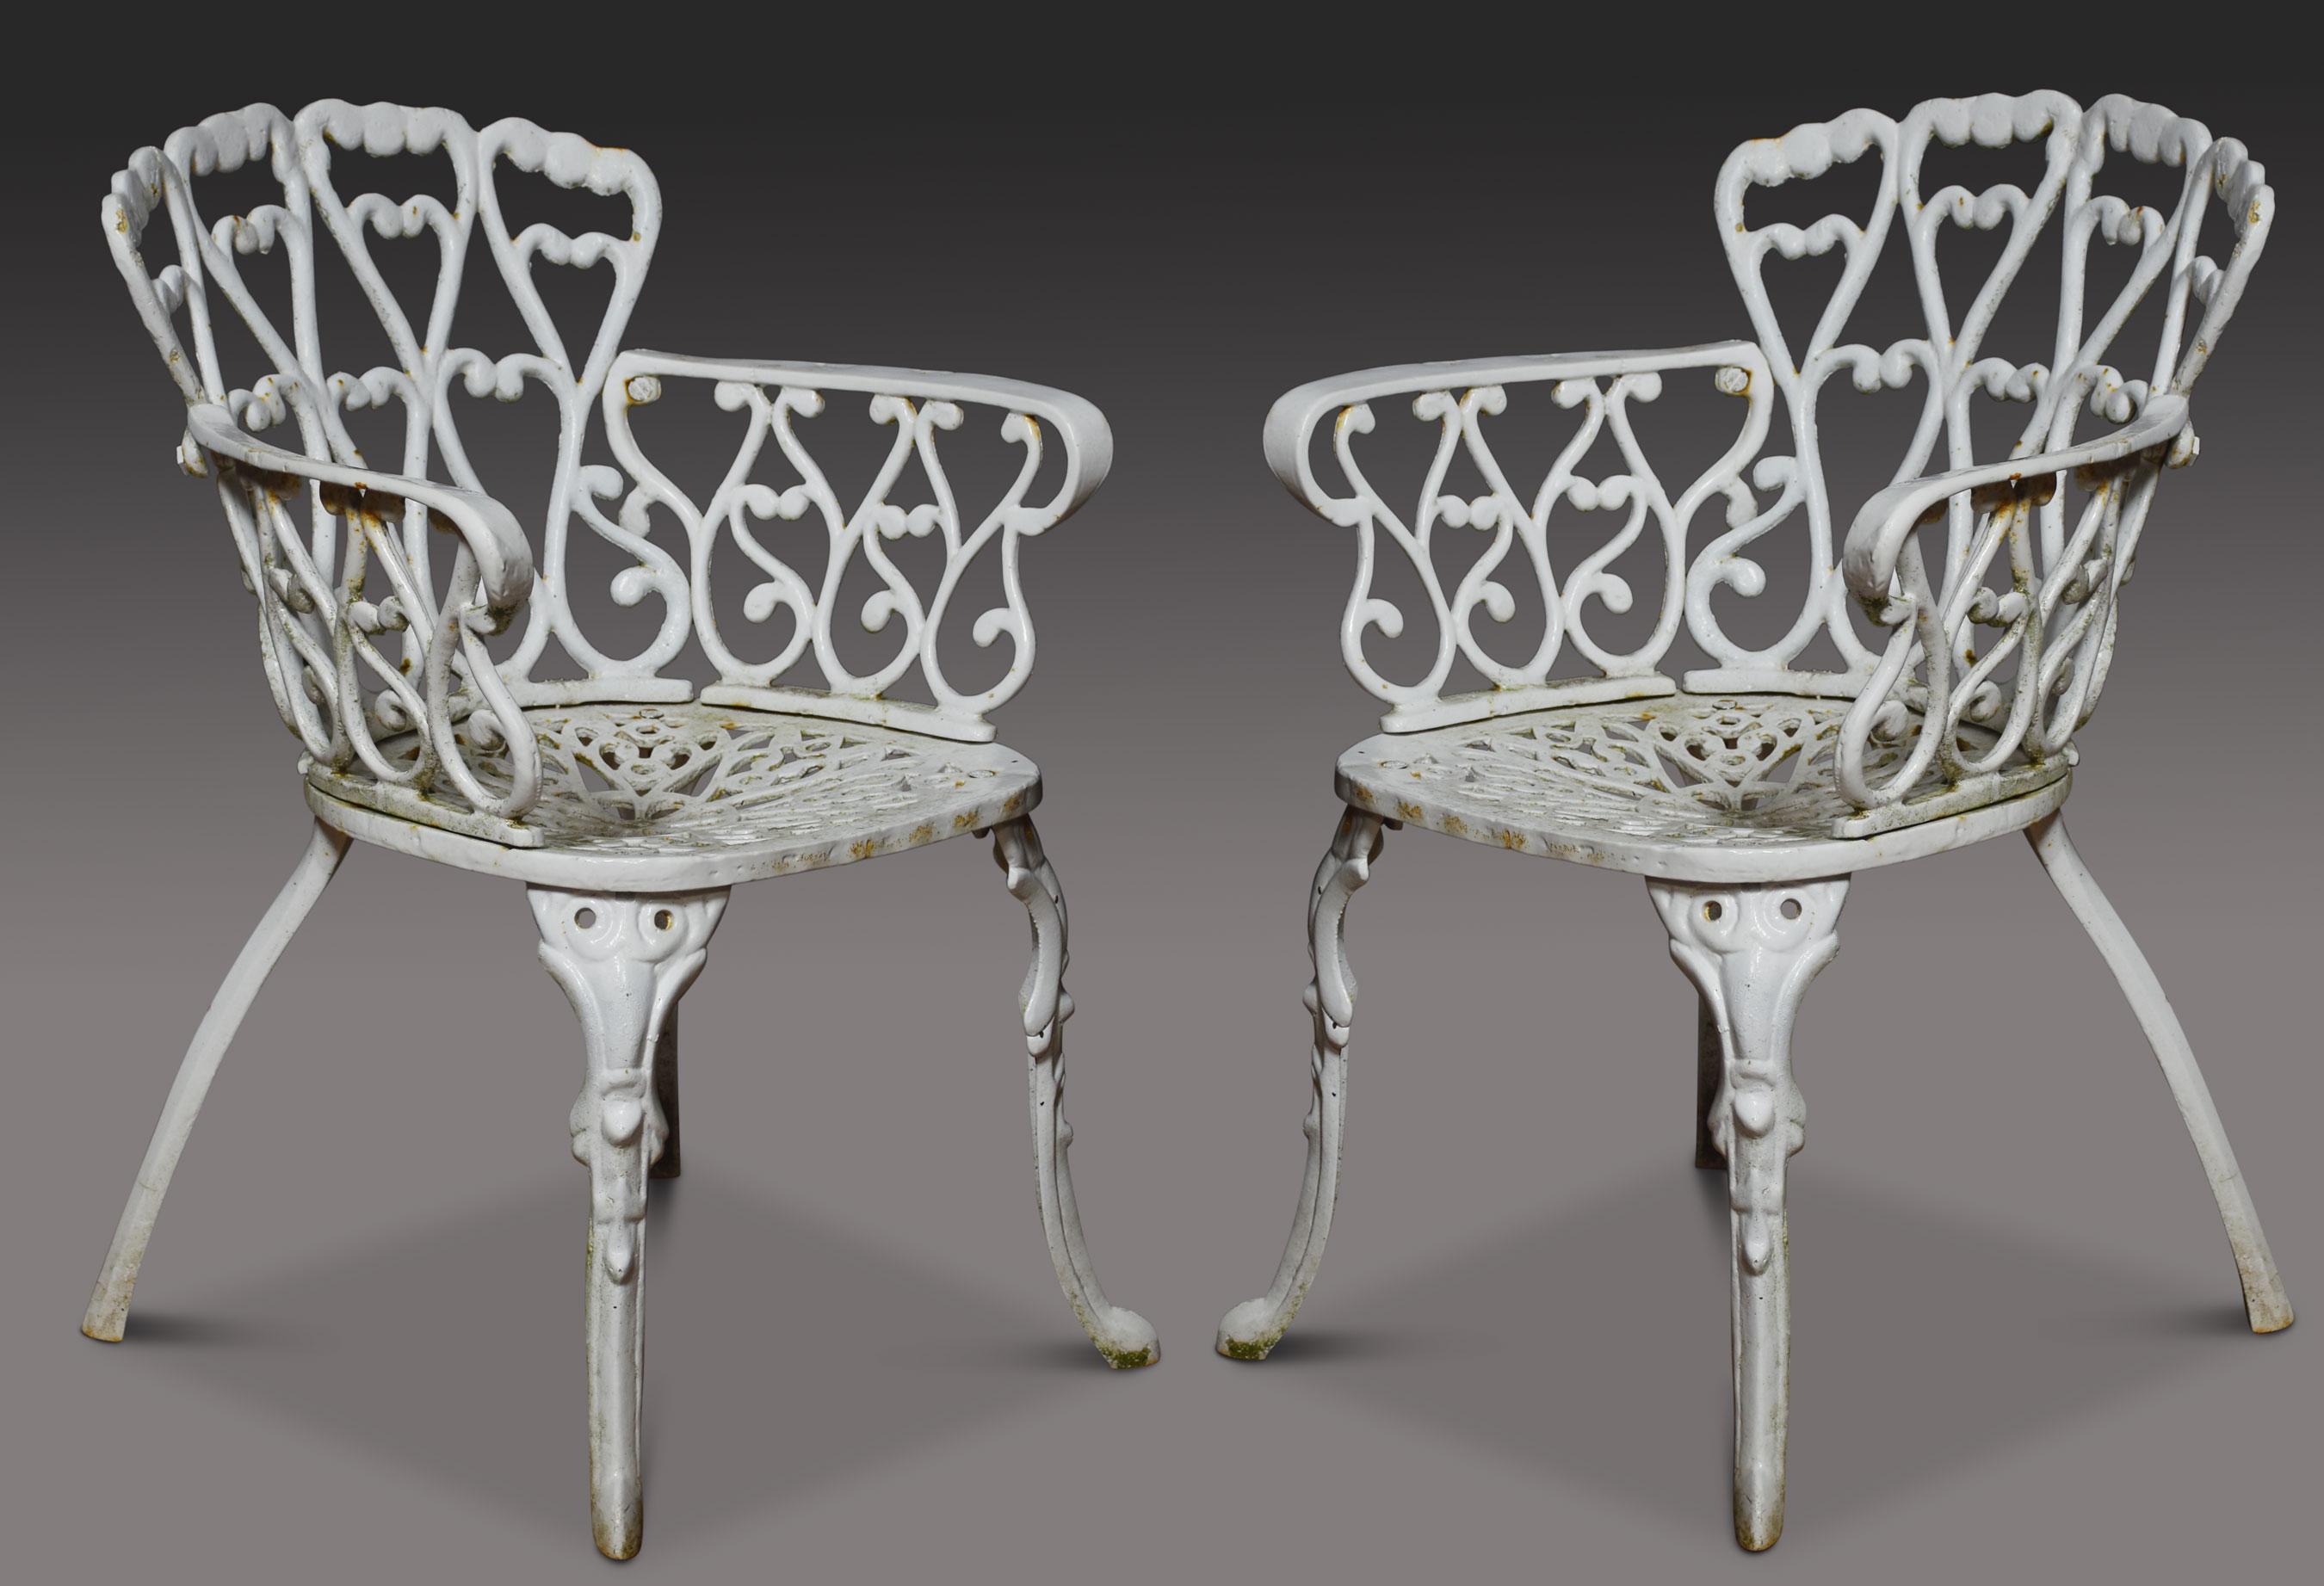 Set of five cast iron Coalbrookdale-style garden chairs, having shaped backs and scrolling arms to the ornate seats raised on slender supports.
Dimensions
Height 28.5 Inches height to seat 15
Width 20 Inches
Depth 22 Inches